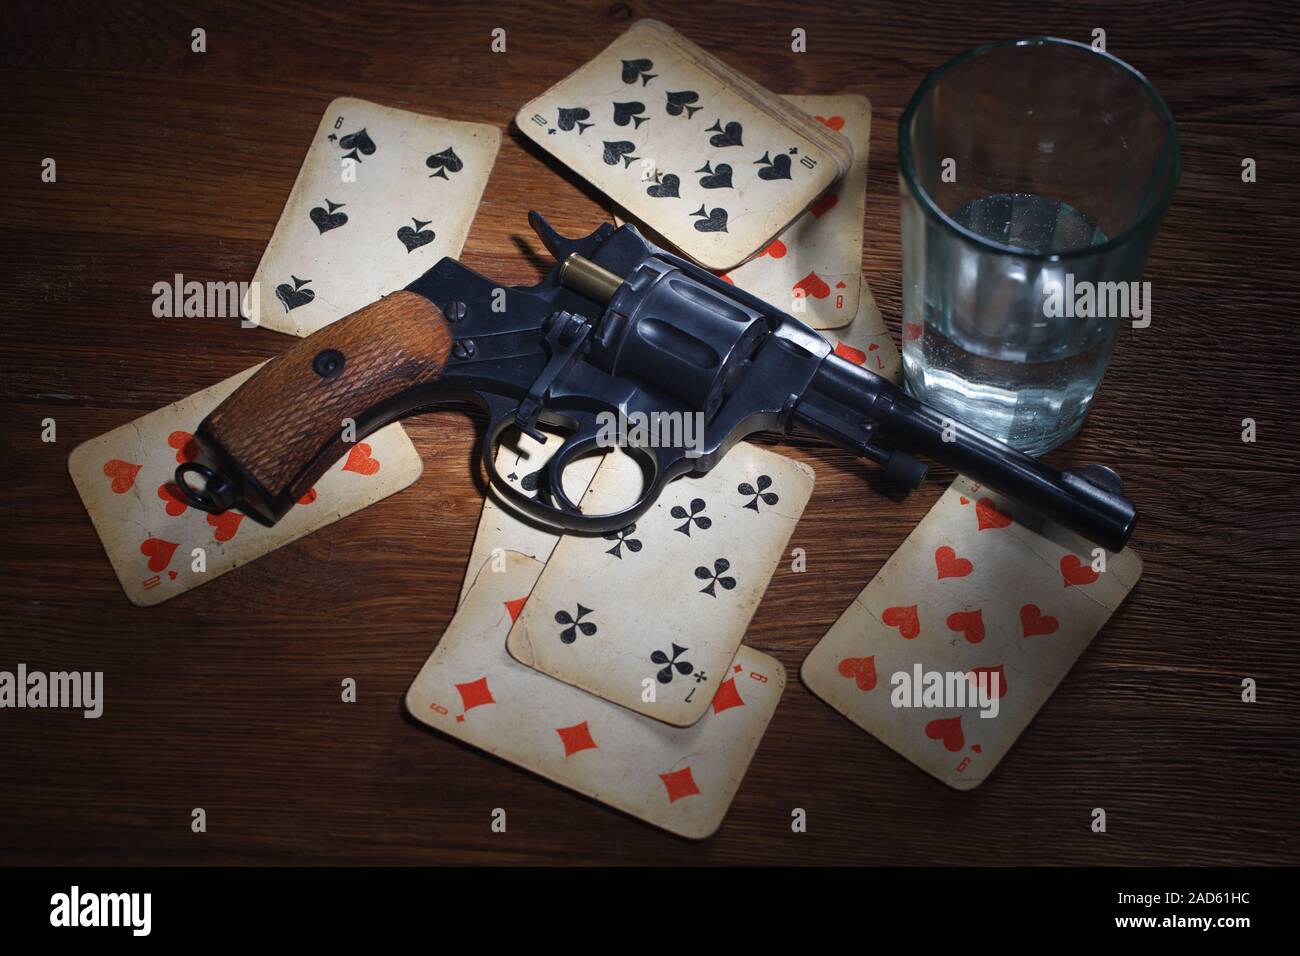 Russian roulette handgun hi-res stock photography and images - Alamy